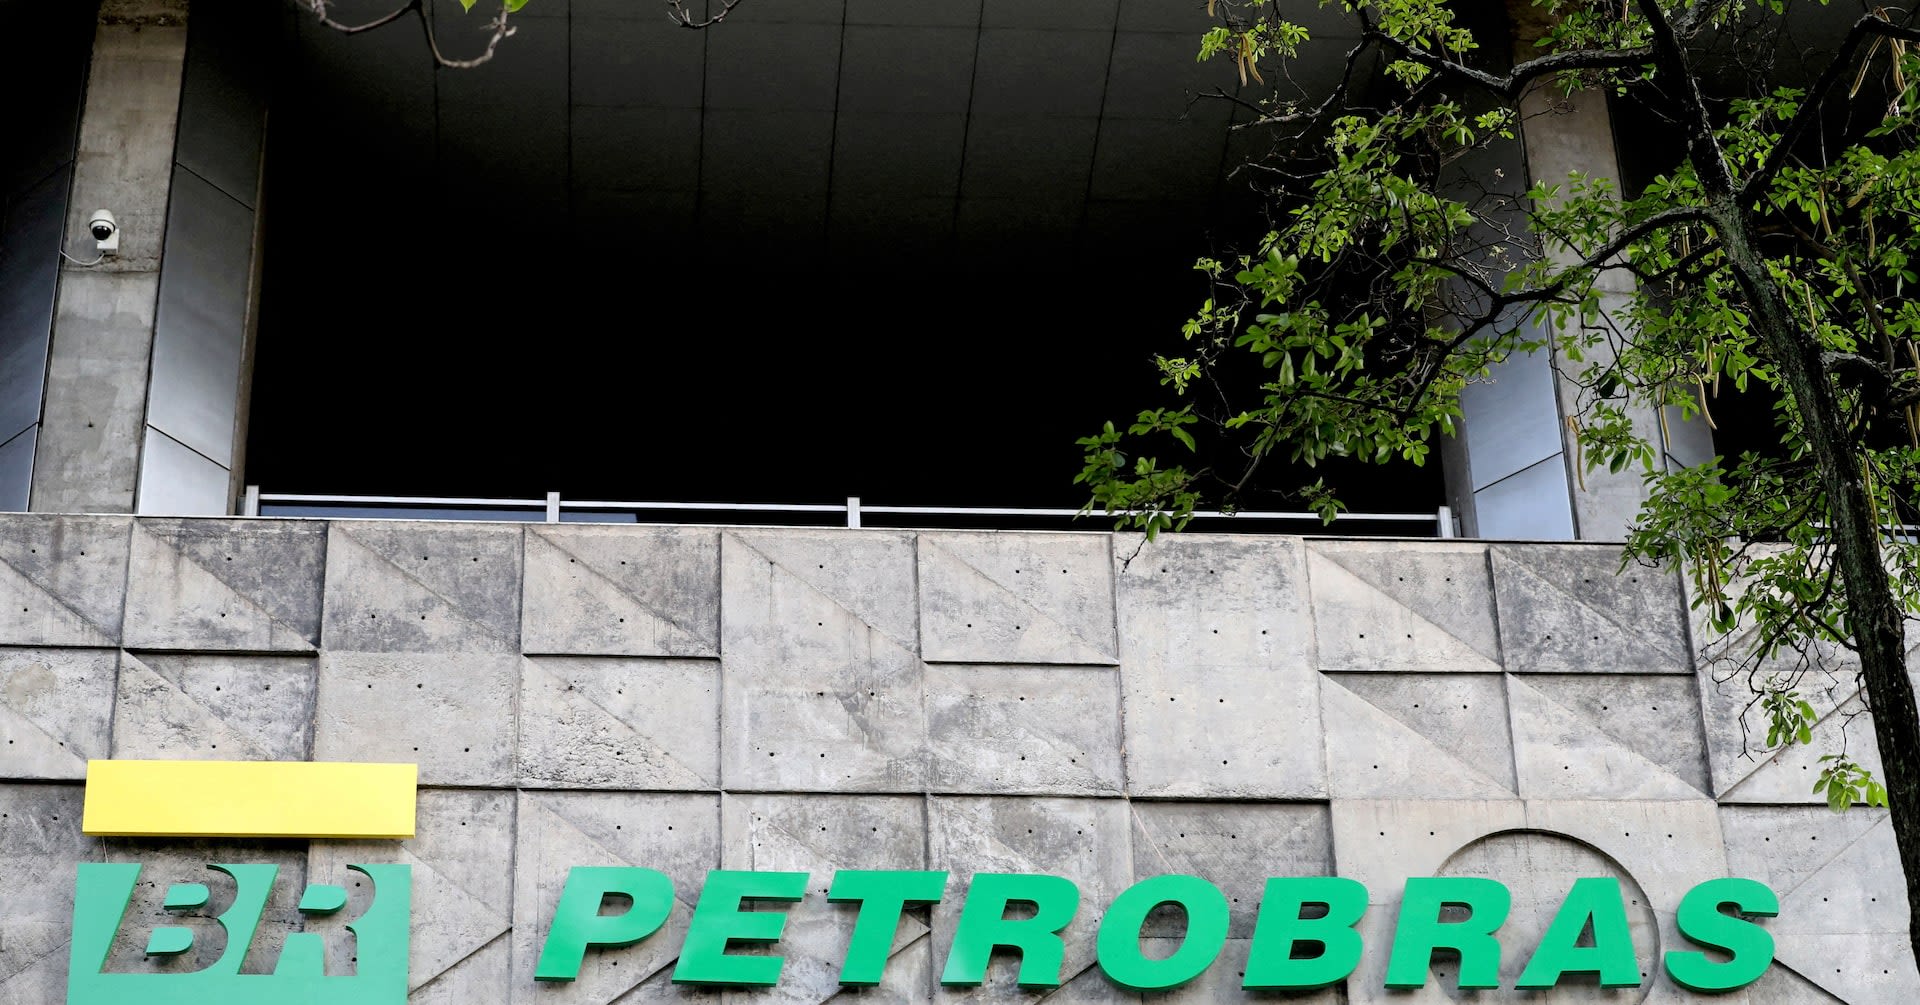 Brazil's Petrobras new CEO Chambriard will take over role on Friday, sources say